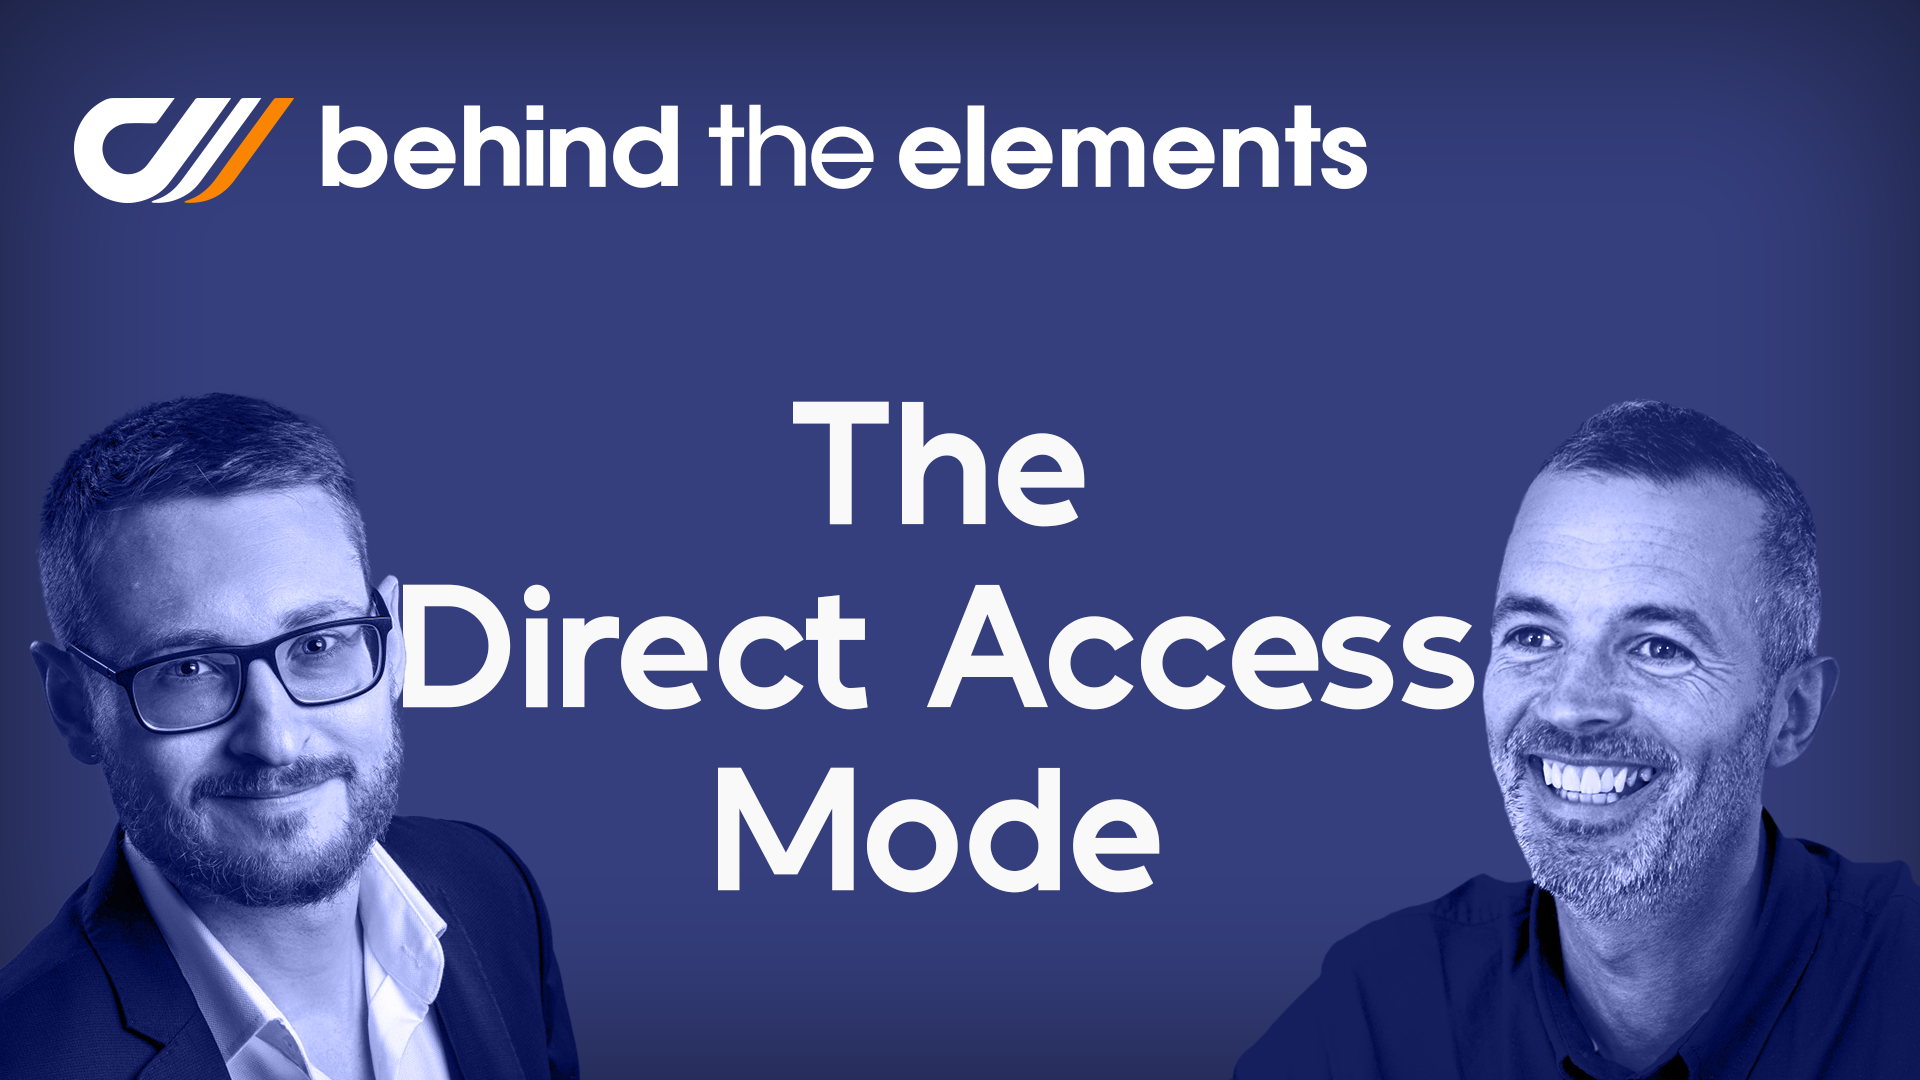 The Direct Access Mode